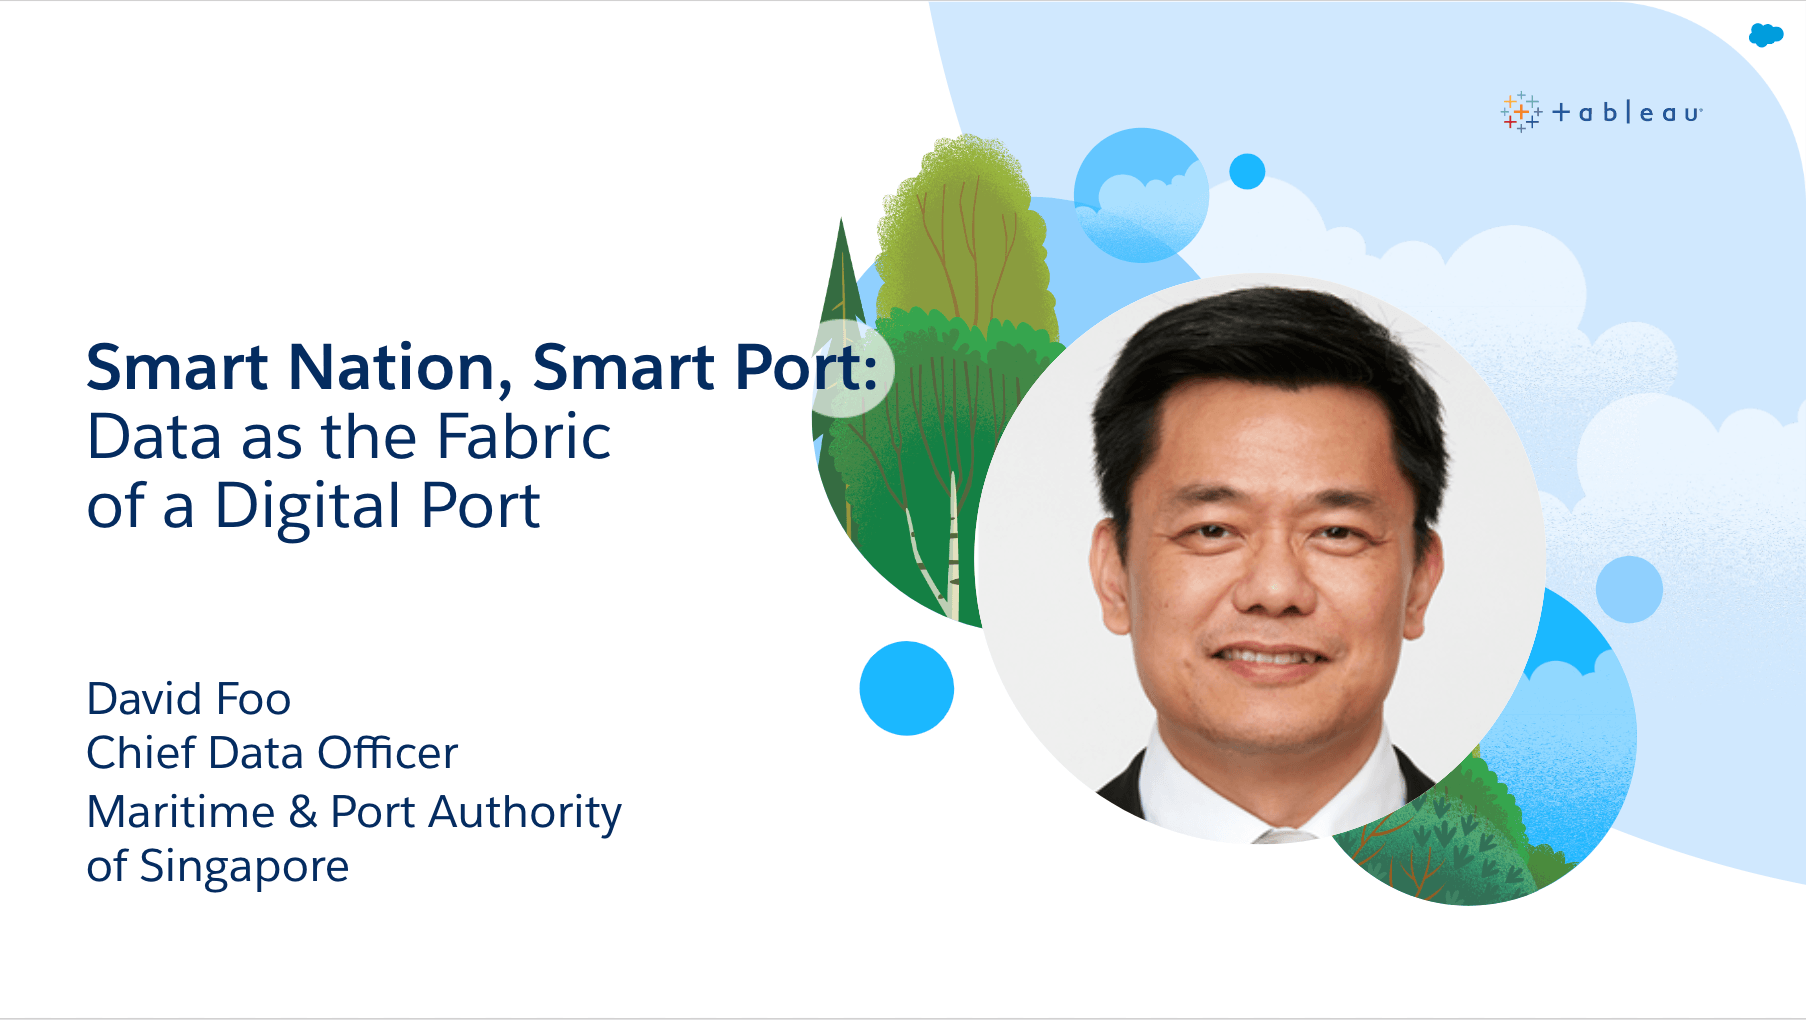 Smart Nation, Smart Port: Data as the Fabric of a Digital Port